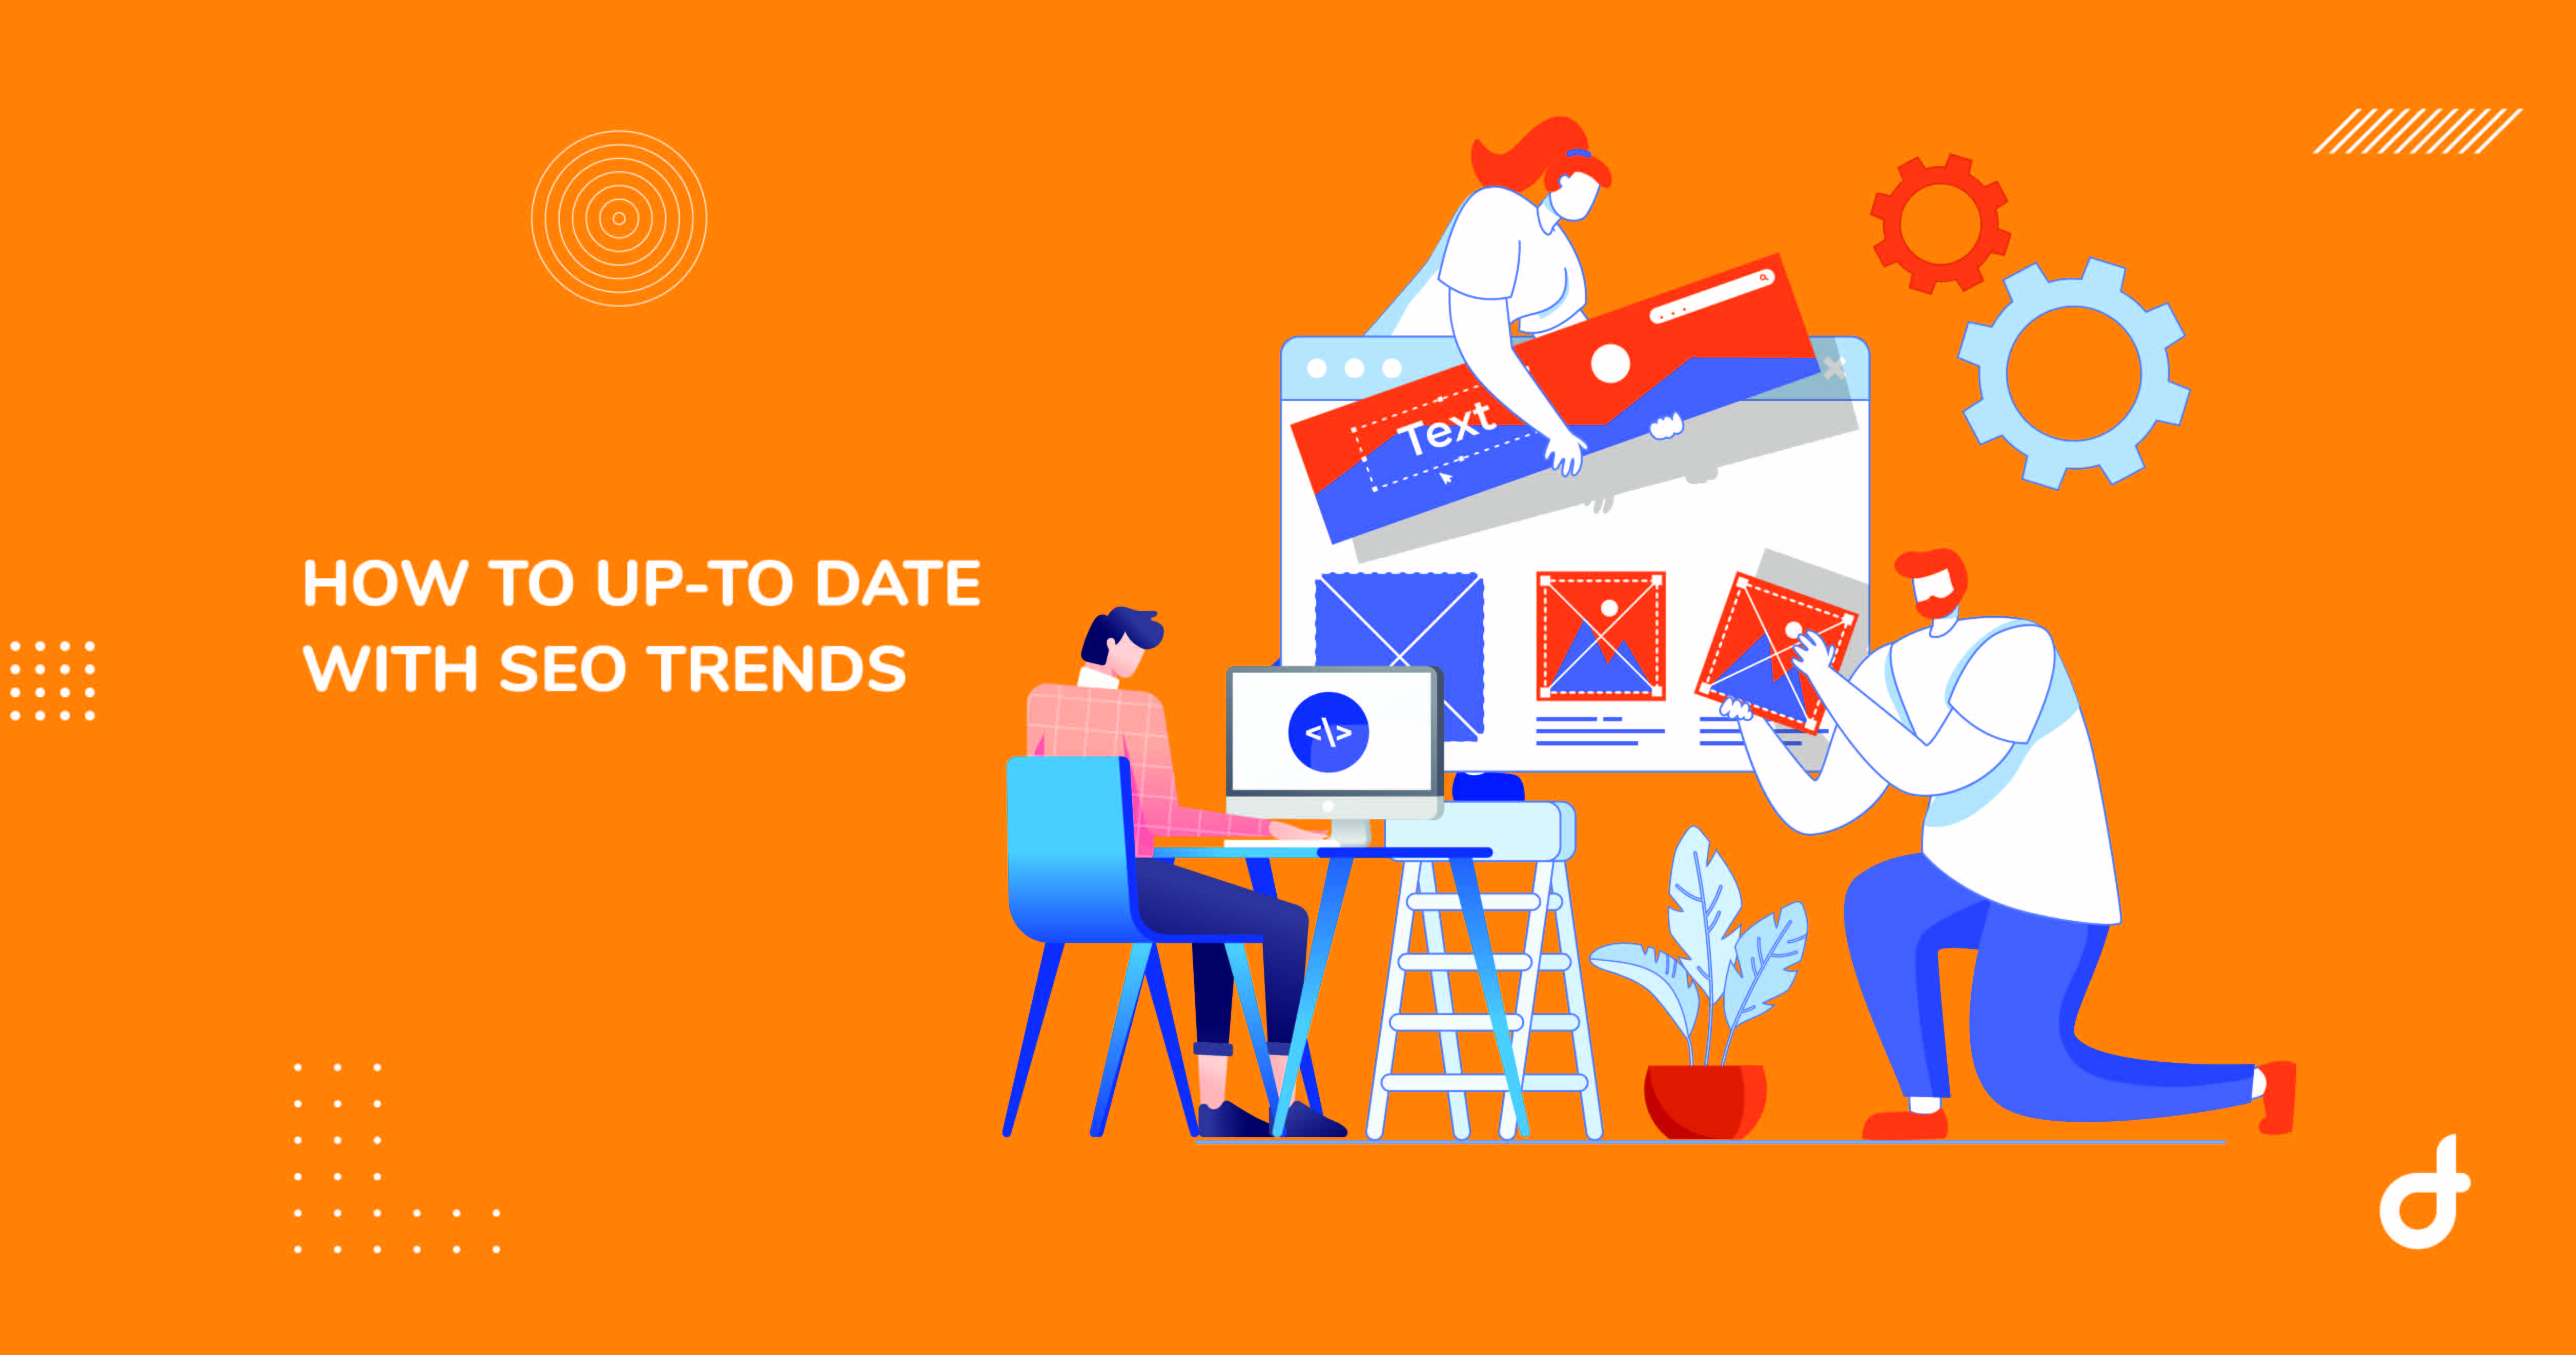 How to Up-to-Date With SEO Trends